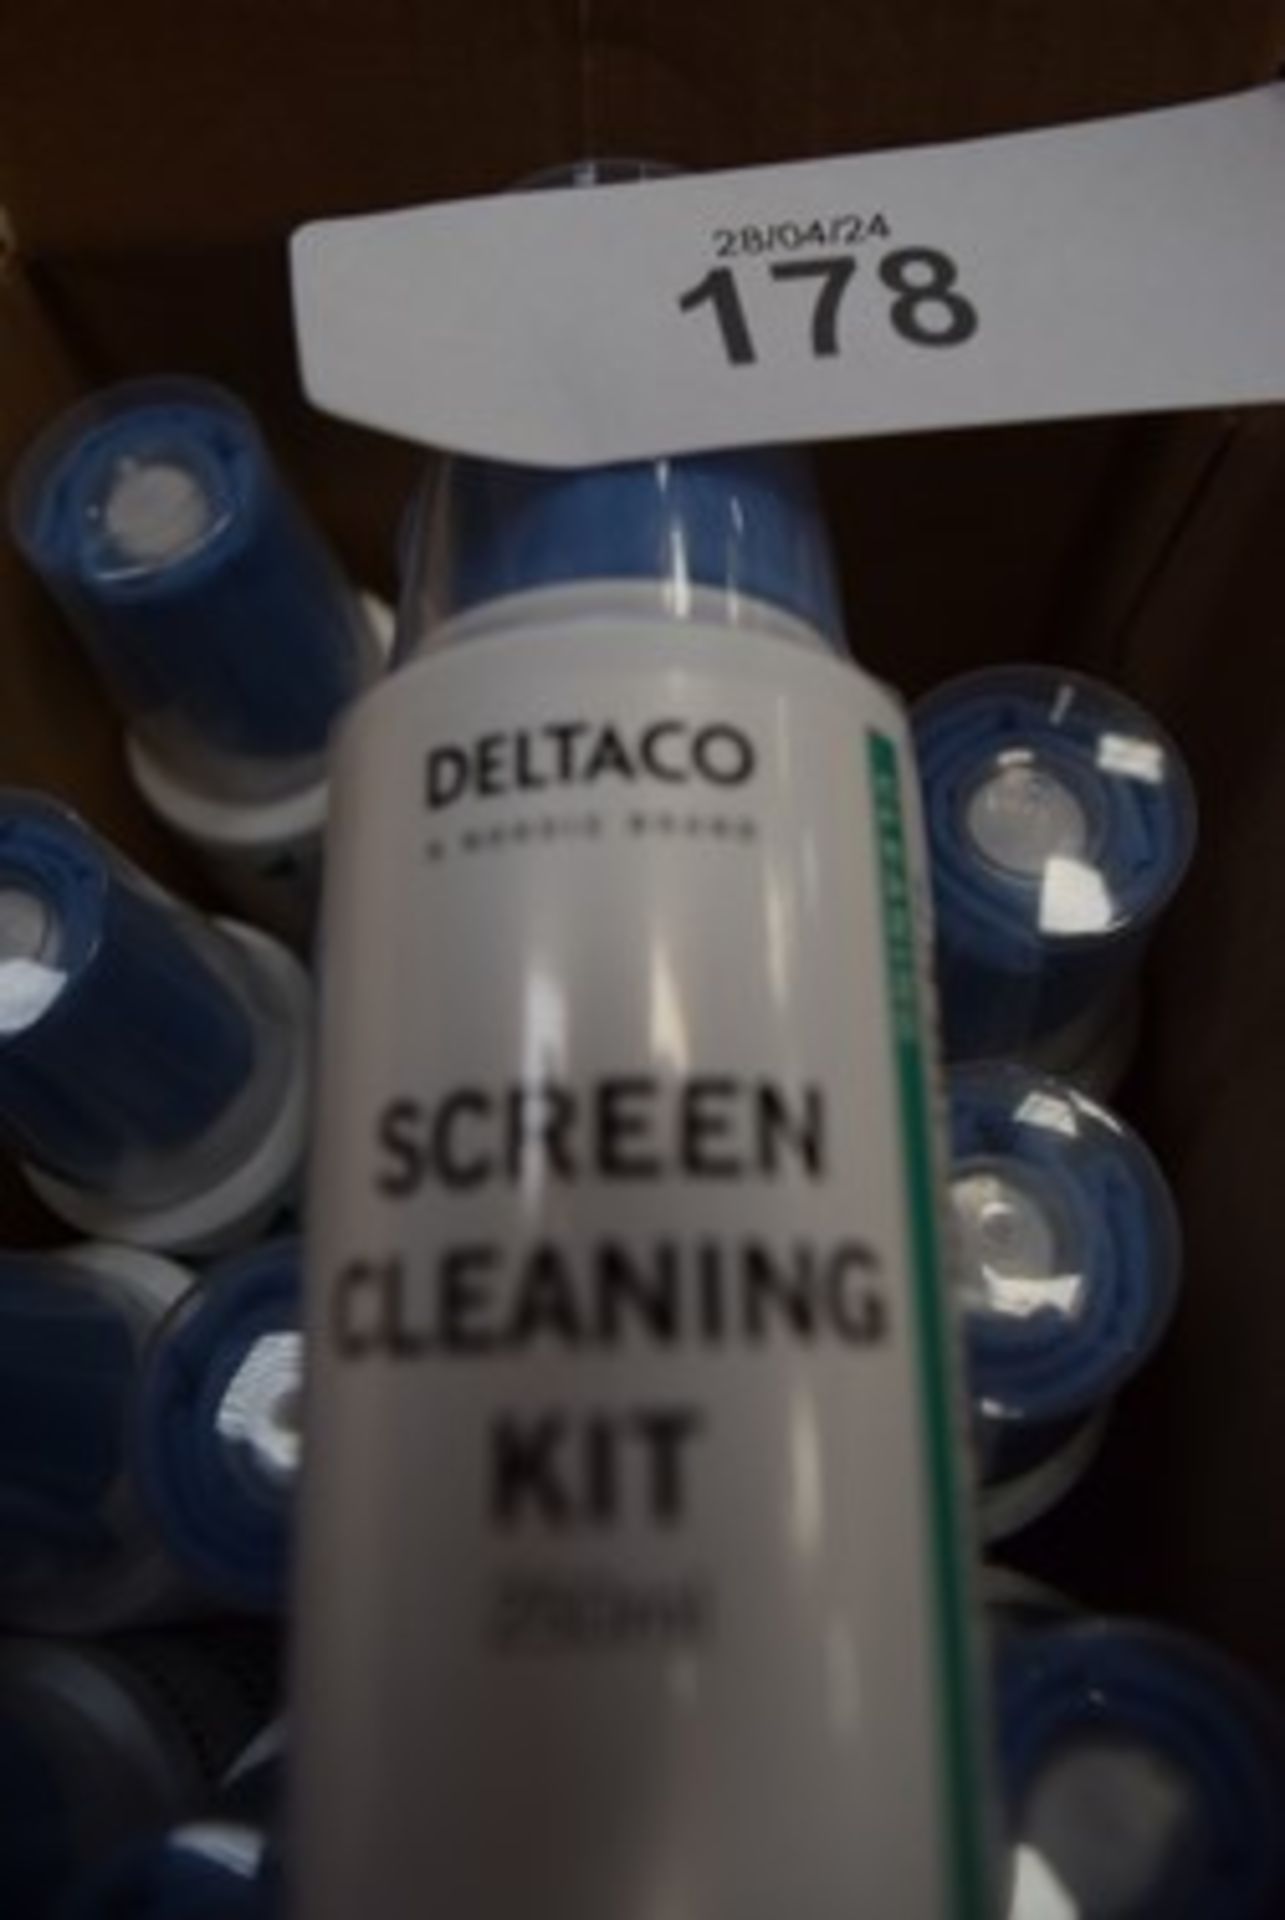 12 x 250ml bottles of Deltaco screen cleaning kits - new in box (C5) - Image 2 of 2